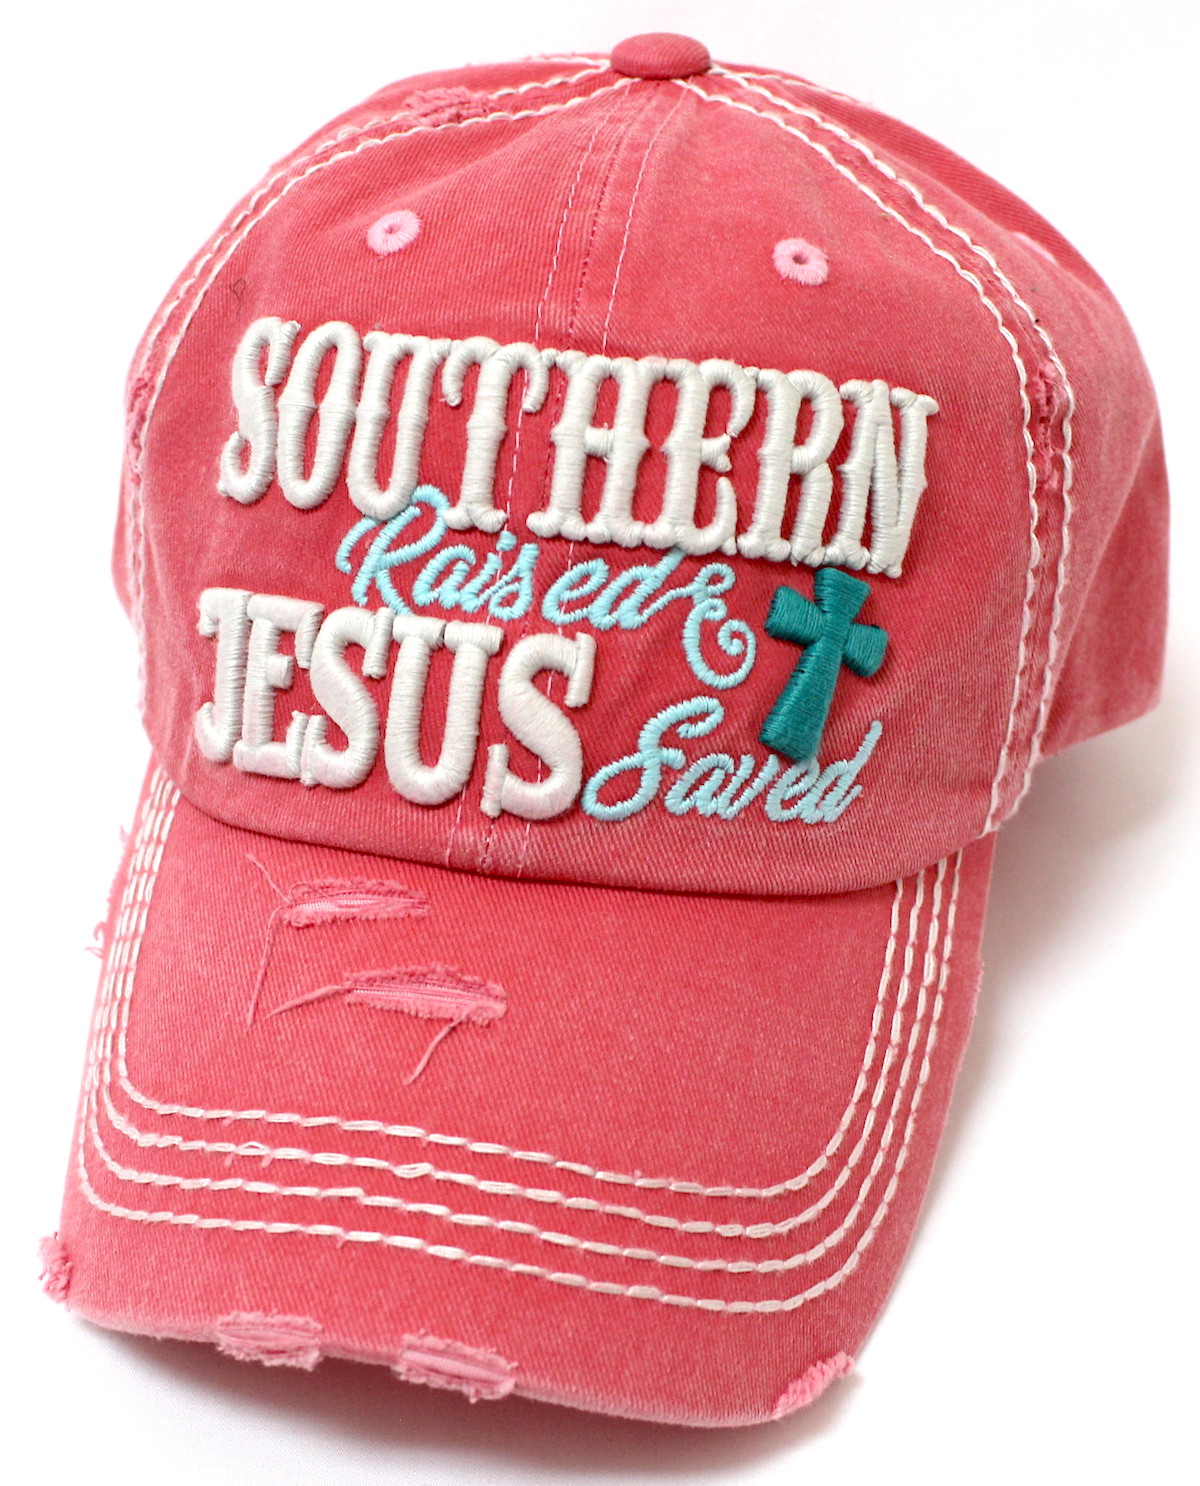 SouthernRaised_Pin_Front